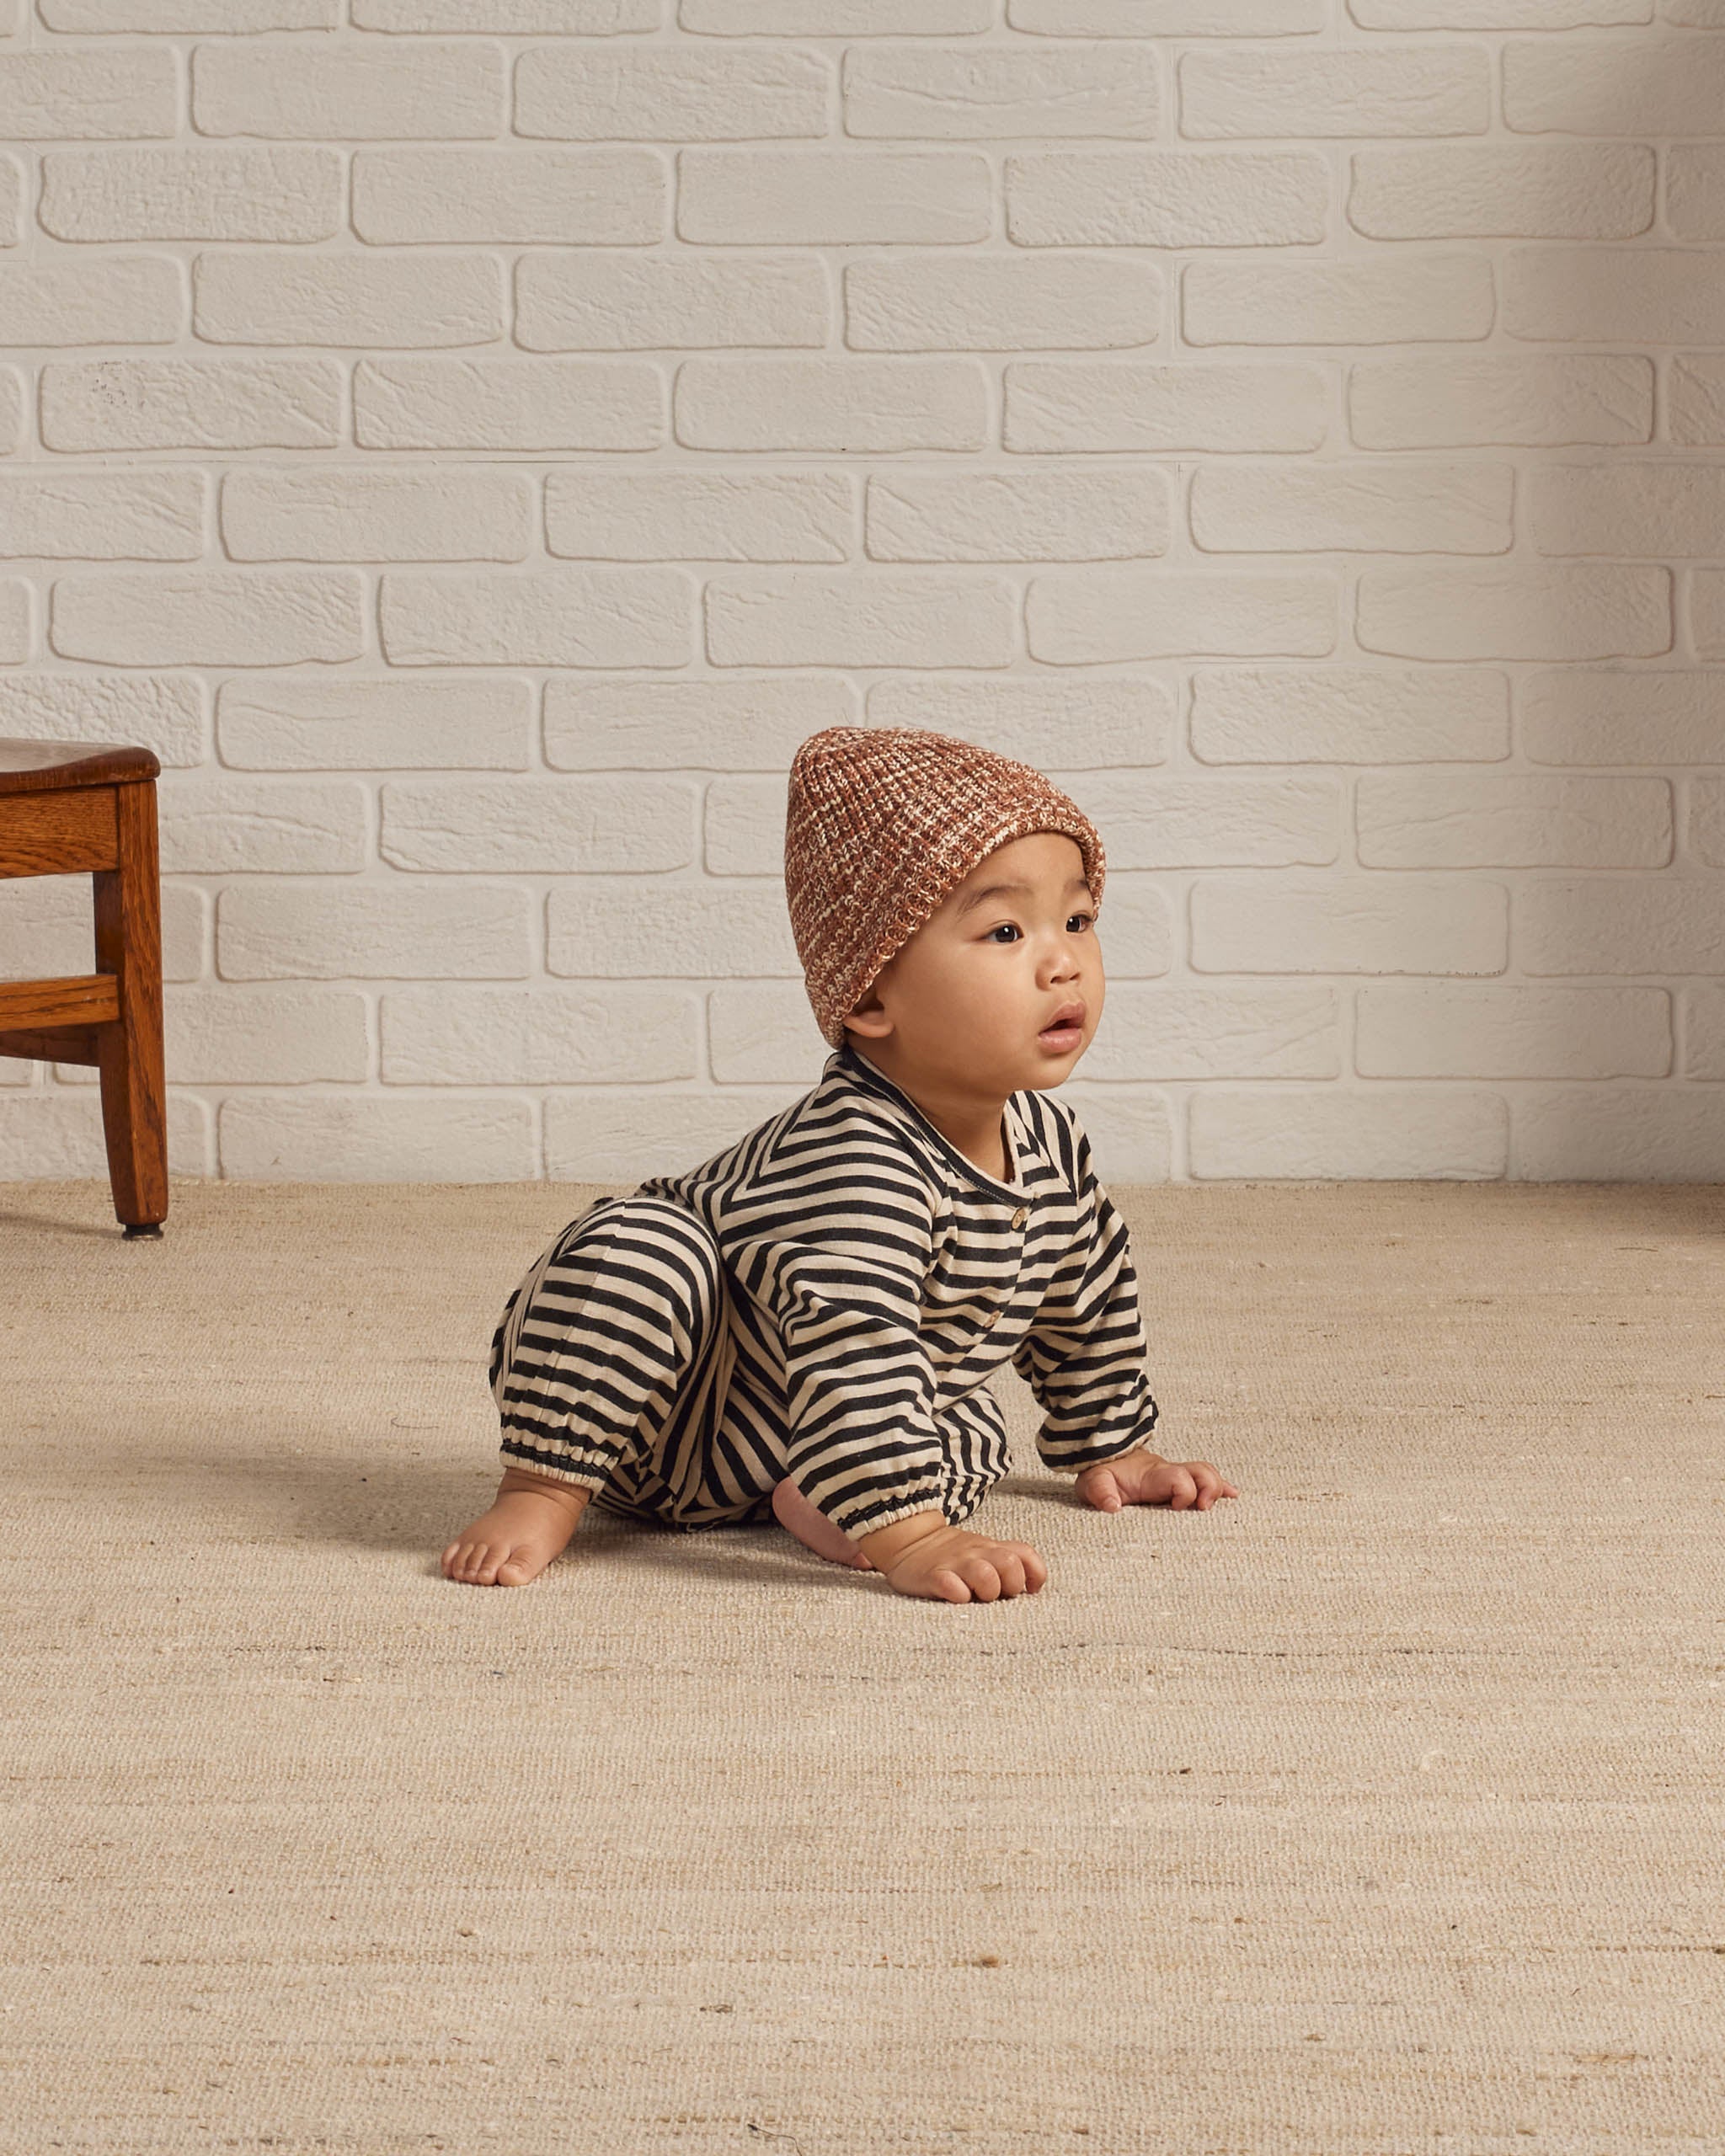 Beanie || Heathered Spice - Rylee + Cru | Kids Clothes | Trendy Baby Clothes | Modern Infant Outfits |